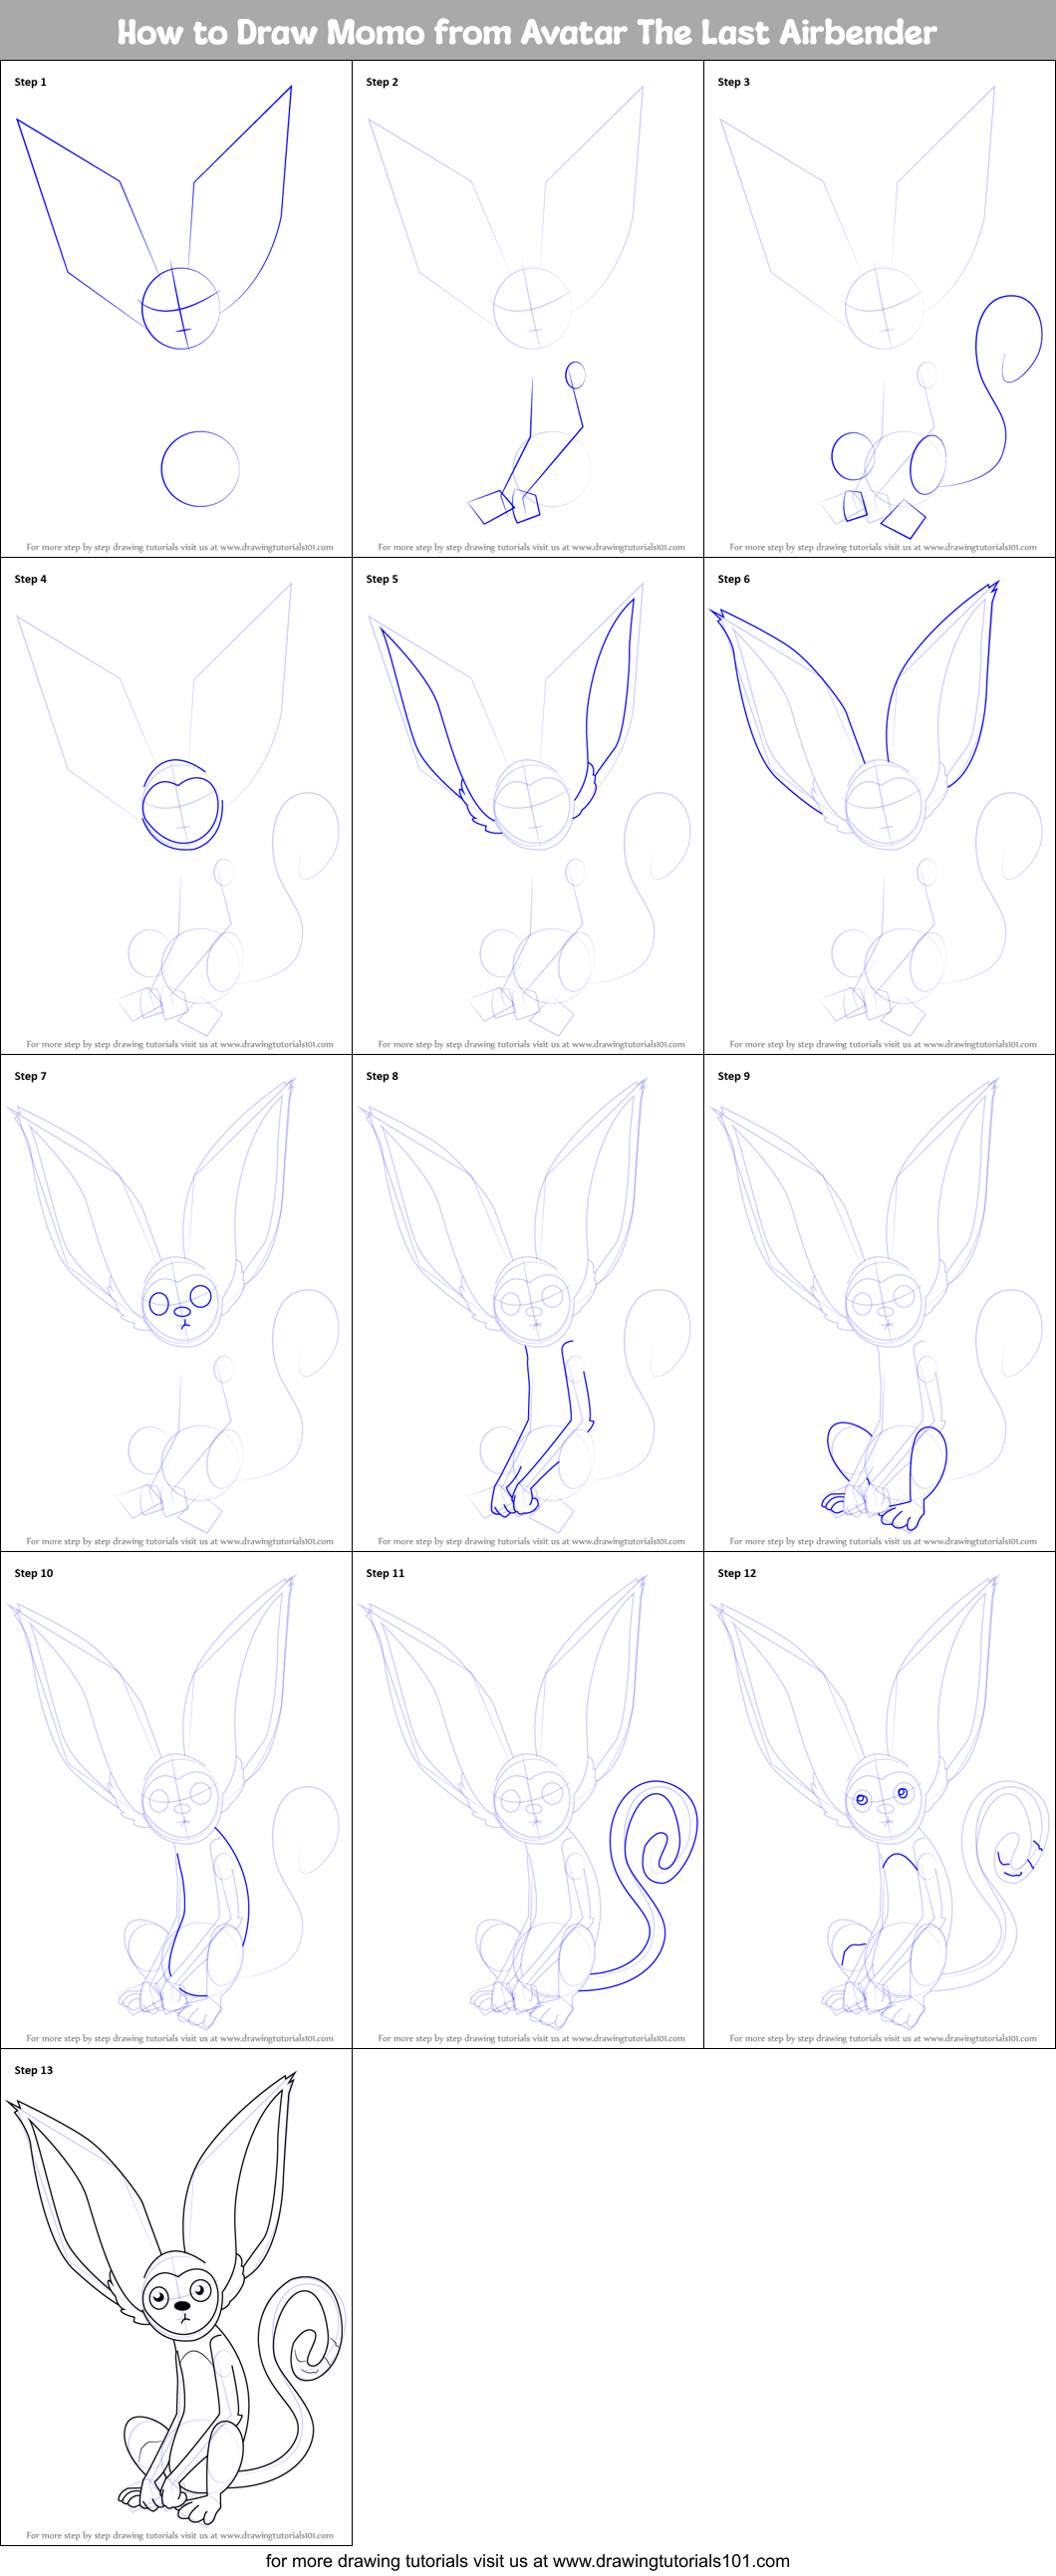 How to Draw Momo from Avatar The Last Airbender printable step by step